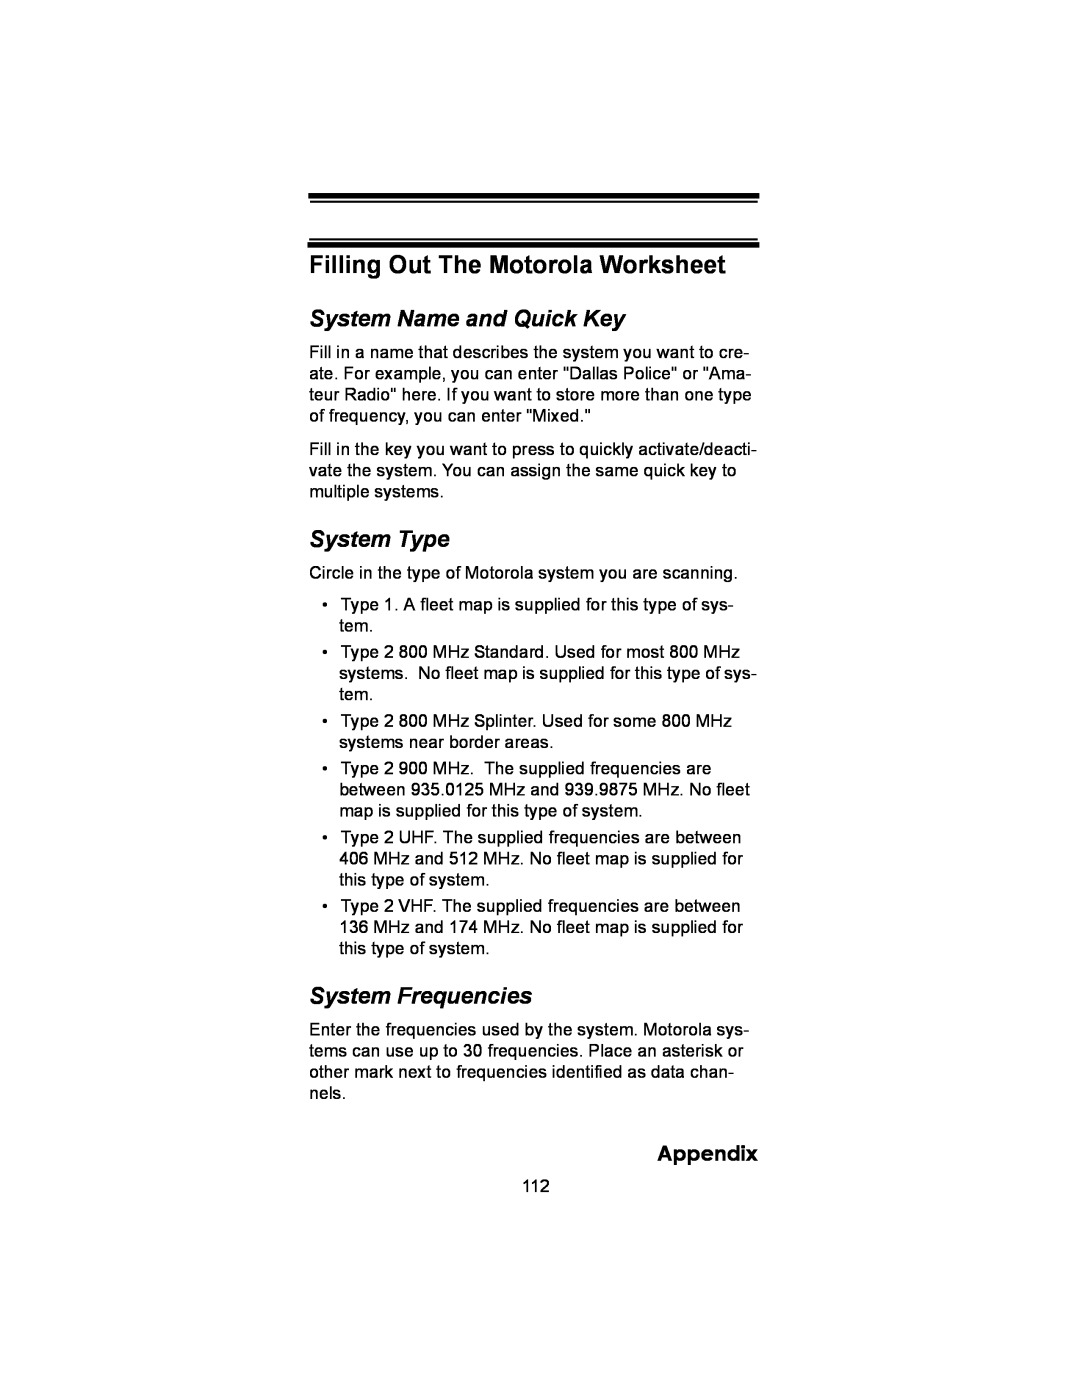 Uniden BC246T Filling Out The Motorola Worksheet, System Type, System Frequencies, System Name and Quick Key, Appendix 